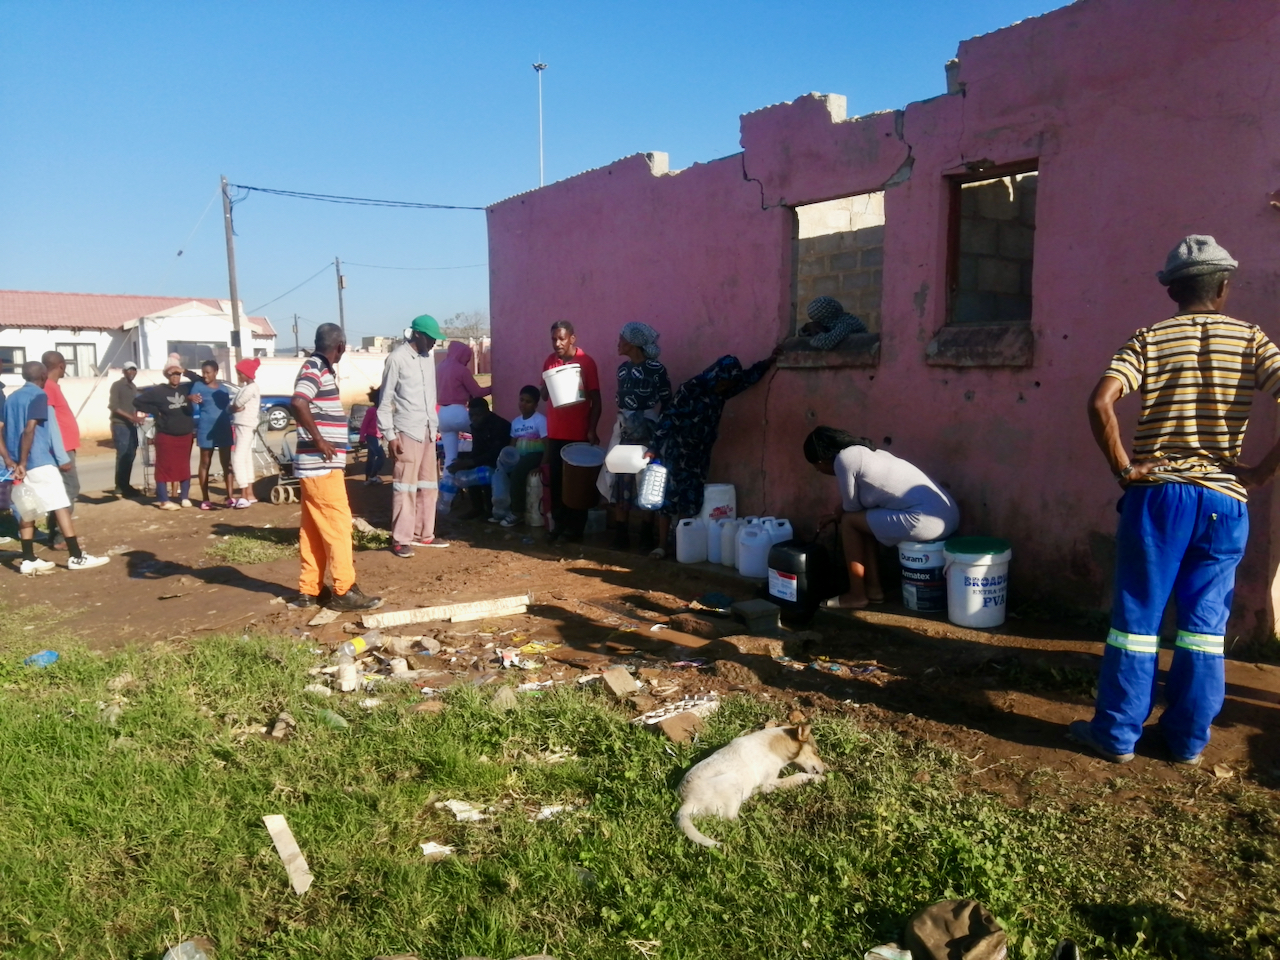 An image of Chris Hani residents in Kariega queuing for water.